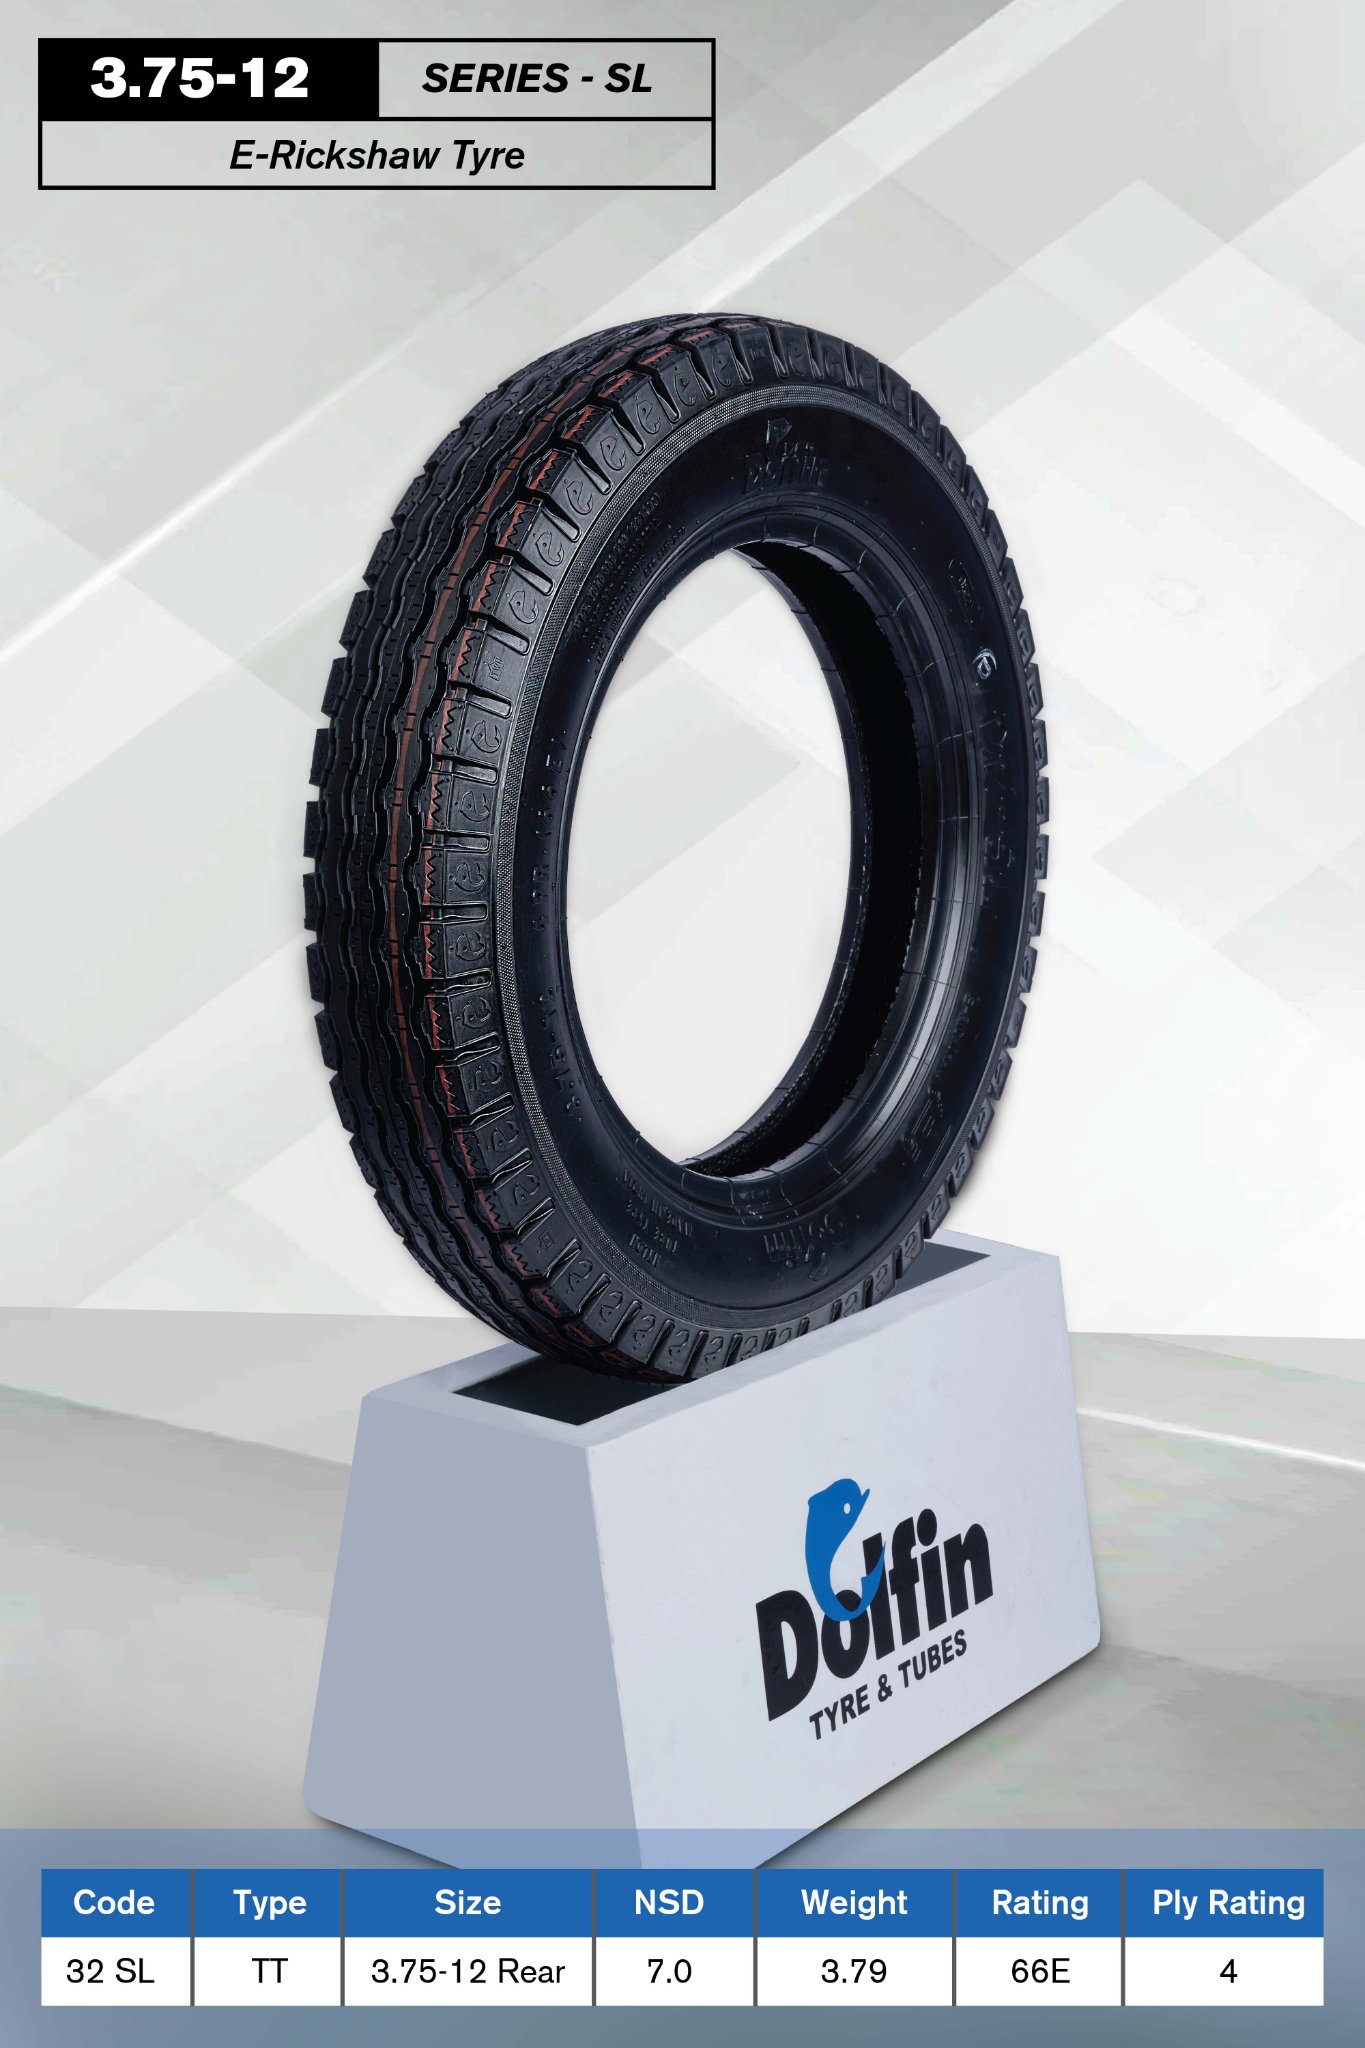  Dolfin Rubbers Limited – Offer Extensive Product Range of Tyres & Tubes